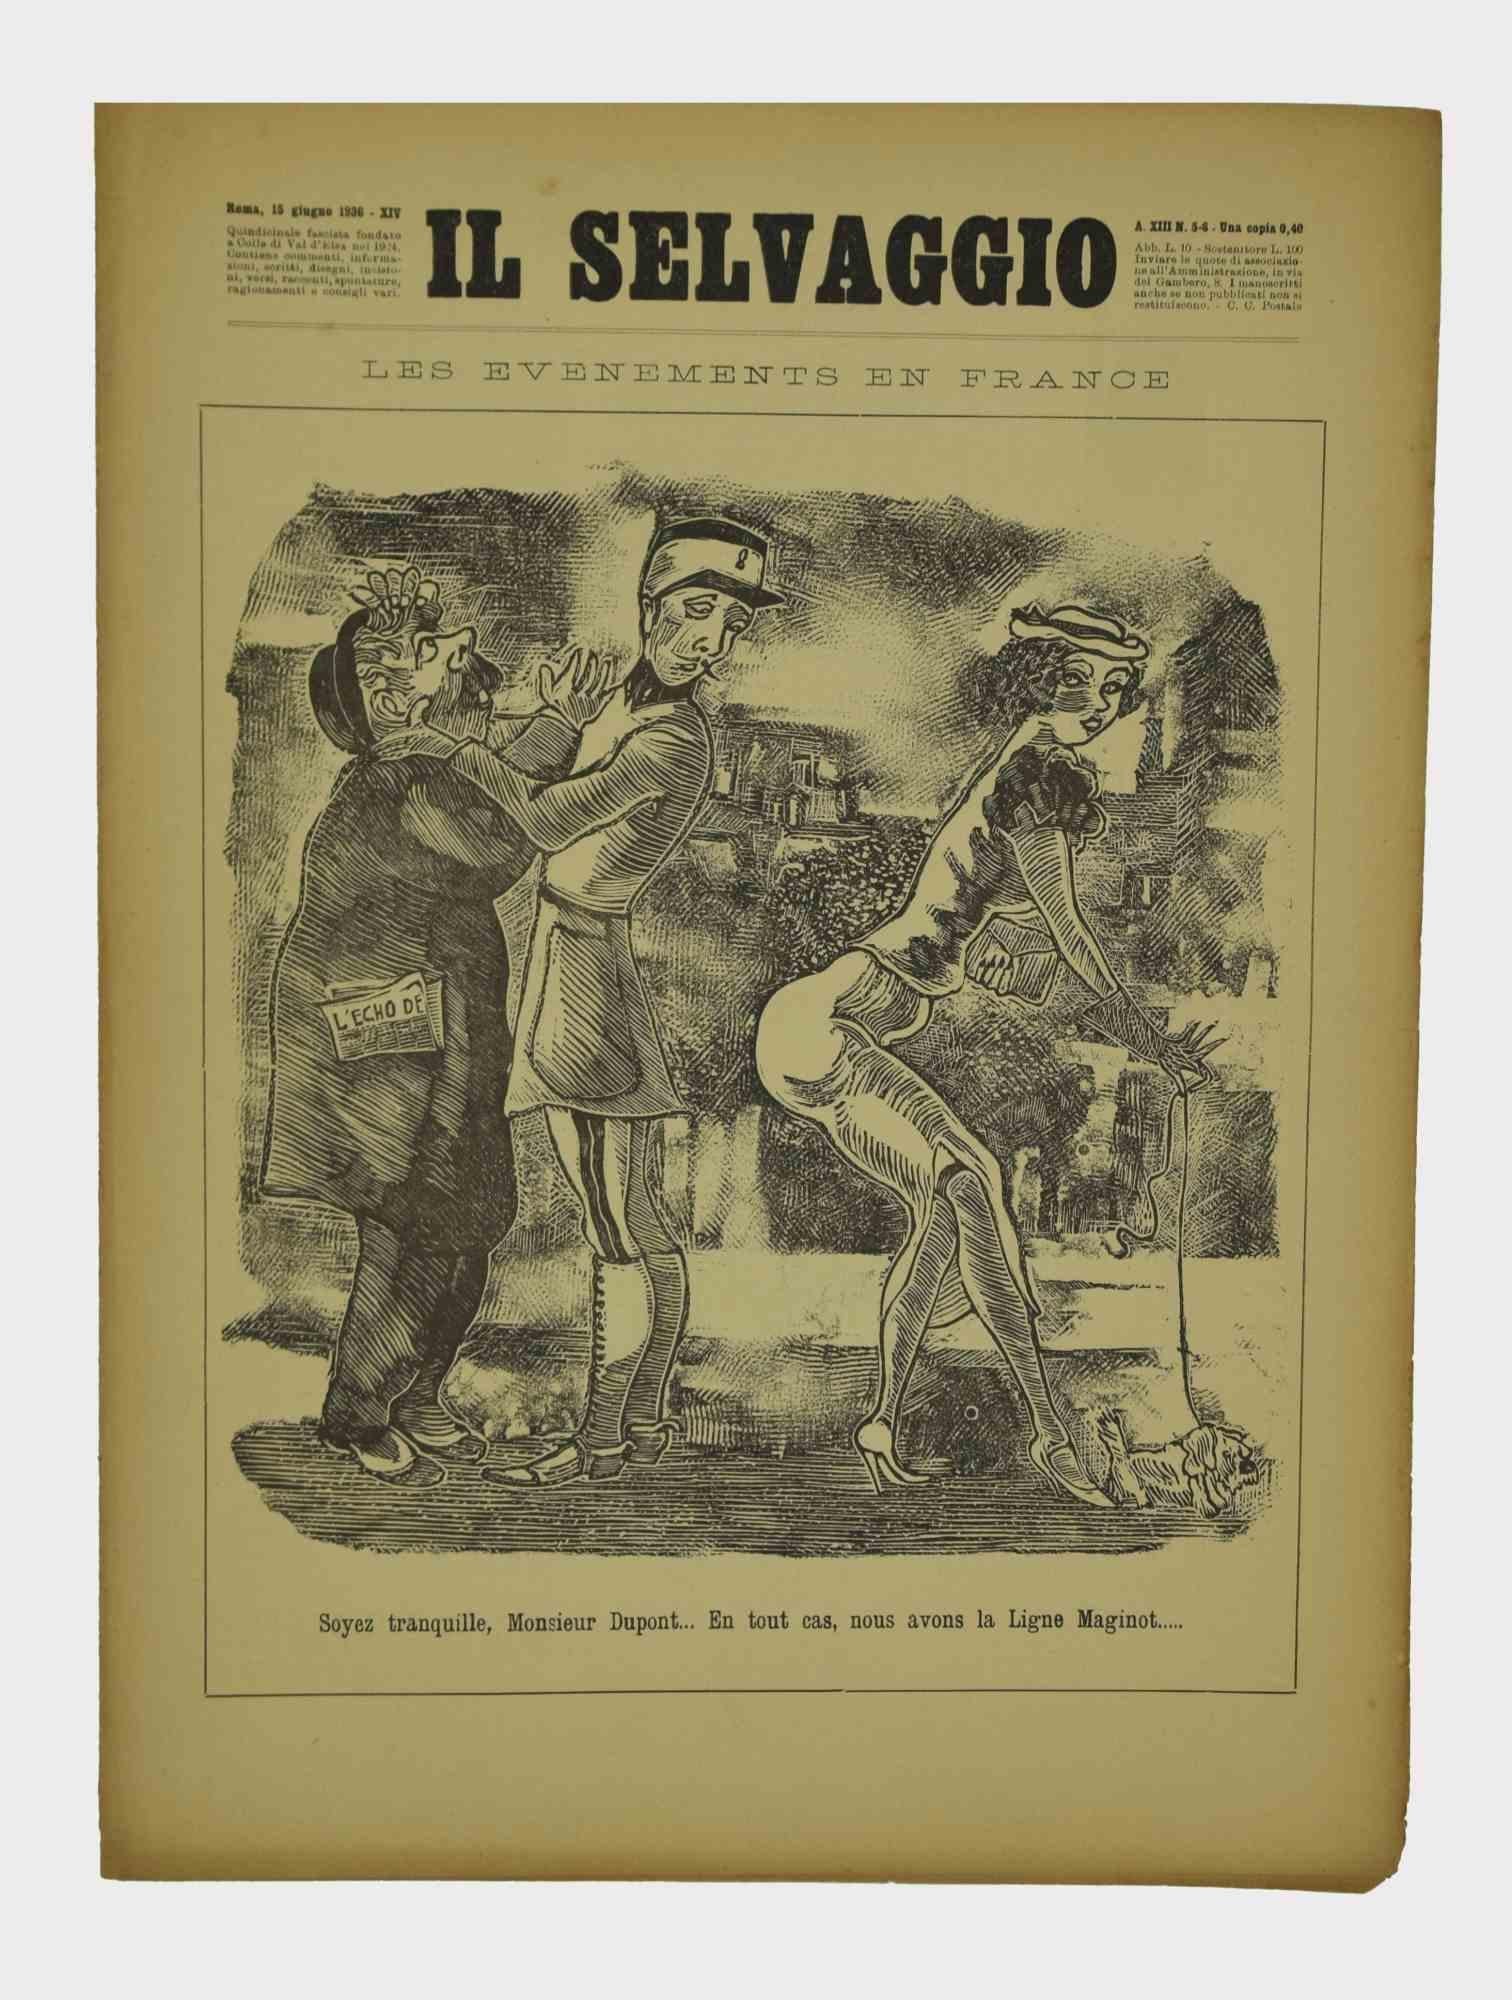 Flipping through a few pages of " Il Selvaggio, No.5-6 1936 " 15 Gennaio 1936-Anno-XIV", "Annual supporter subscription - Una copia 40 Cent - Fortnightly Newspaper letters arts and sciences".

Engraving by the artist Mino Maccari

Good conditions.

 